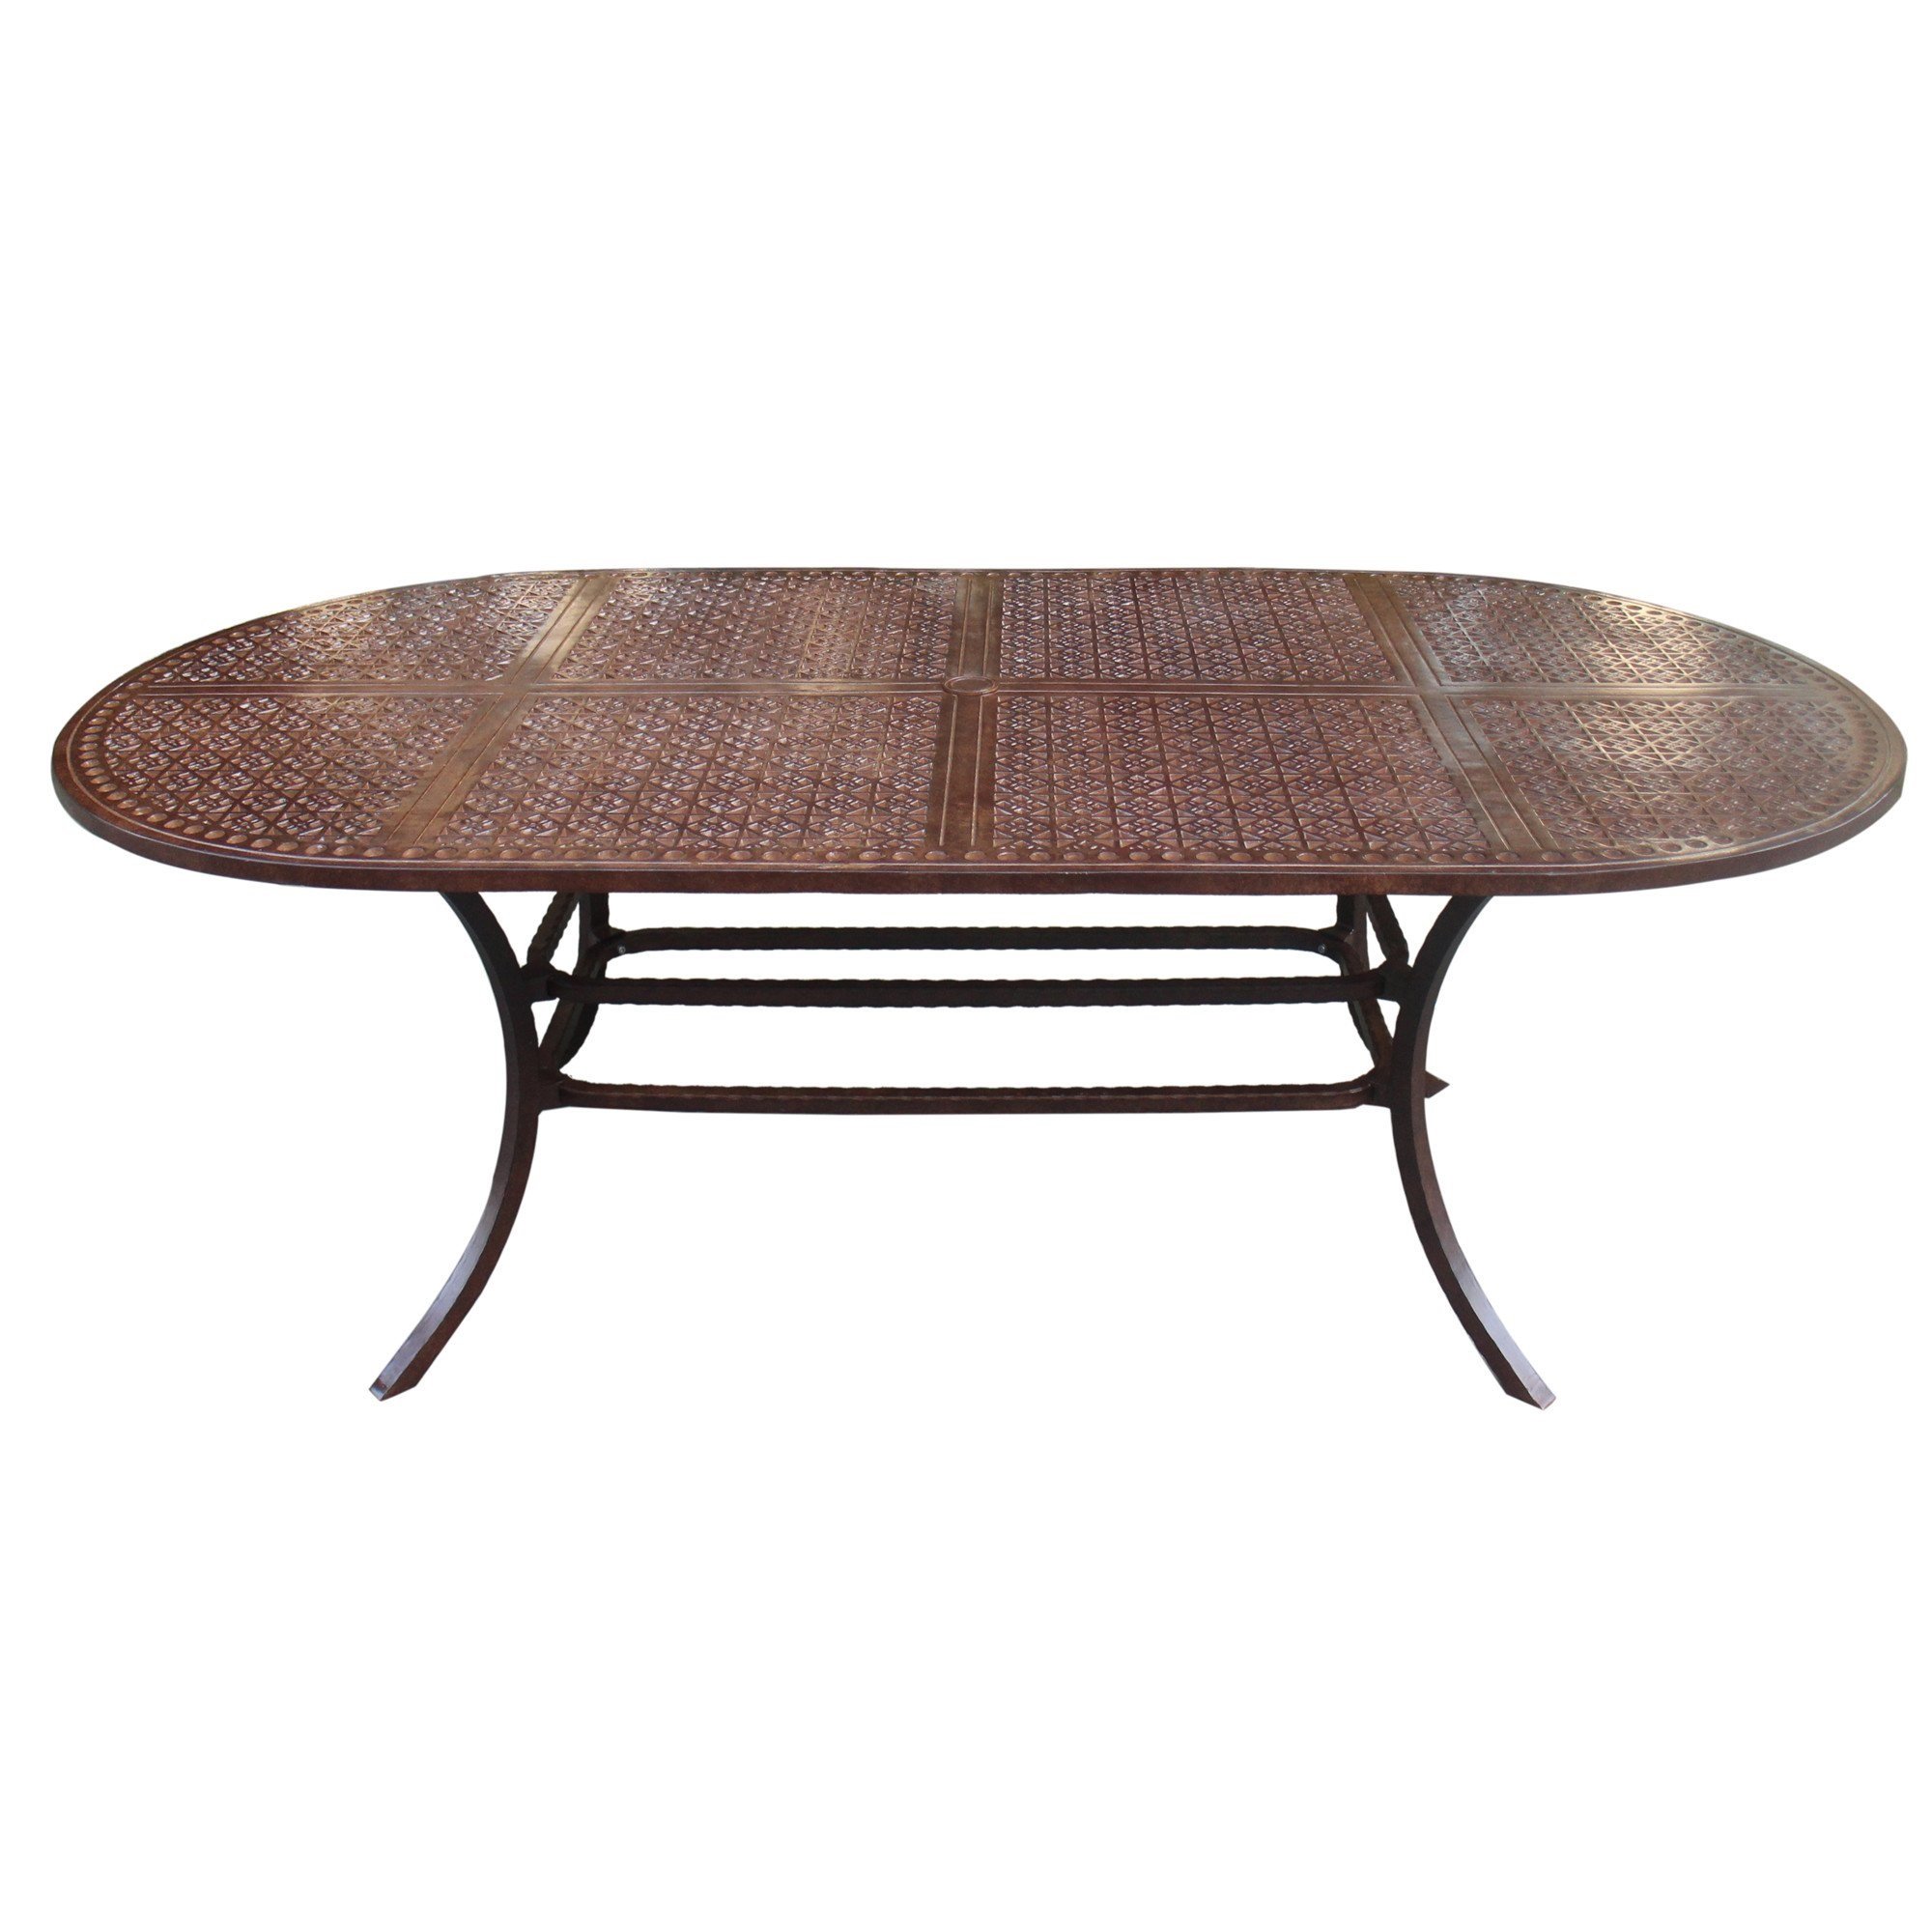 Outdoor Patio Cast Aluminum 42 x 84 Inch Oval Dining Table In Rustic Brown-CASAINC